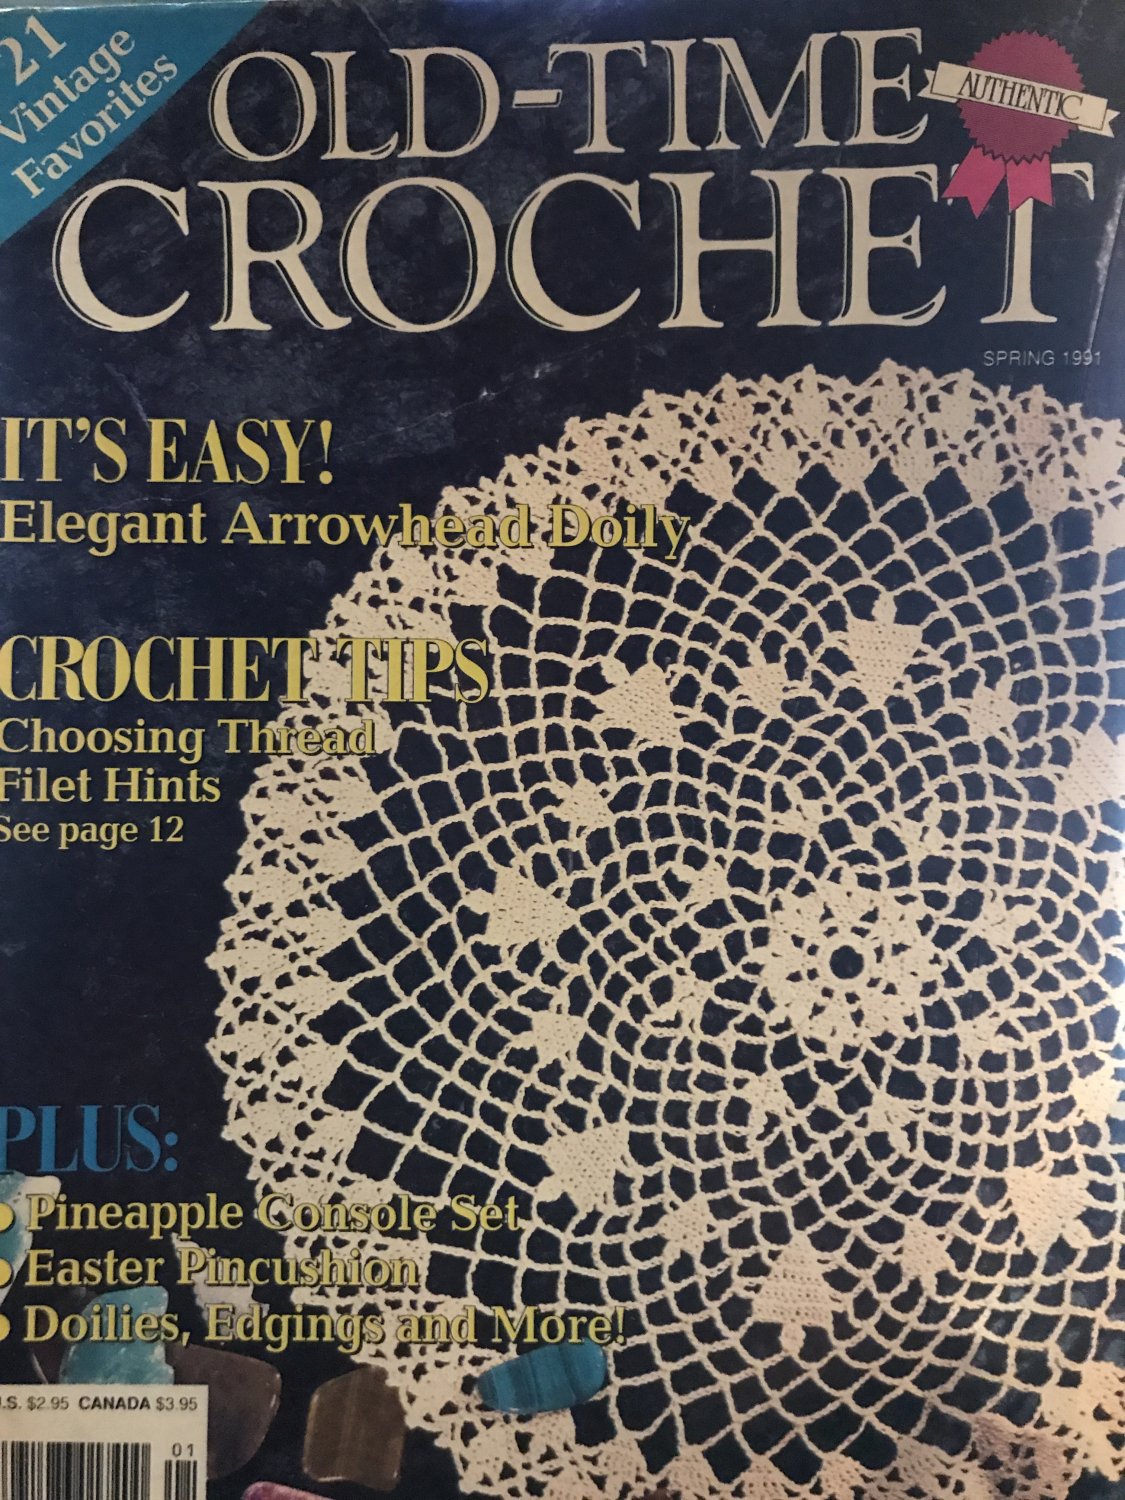 Old Time Crochet Magazine Spring 1991 Arrowhead Doily, Pineapple Console set, Easter pincushion